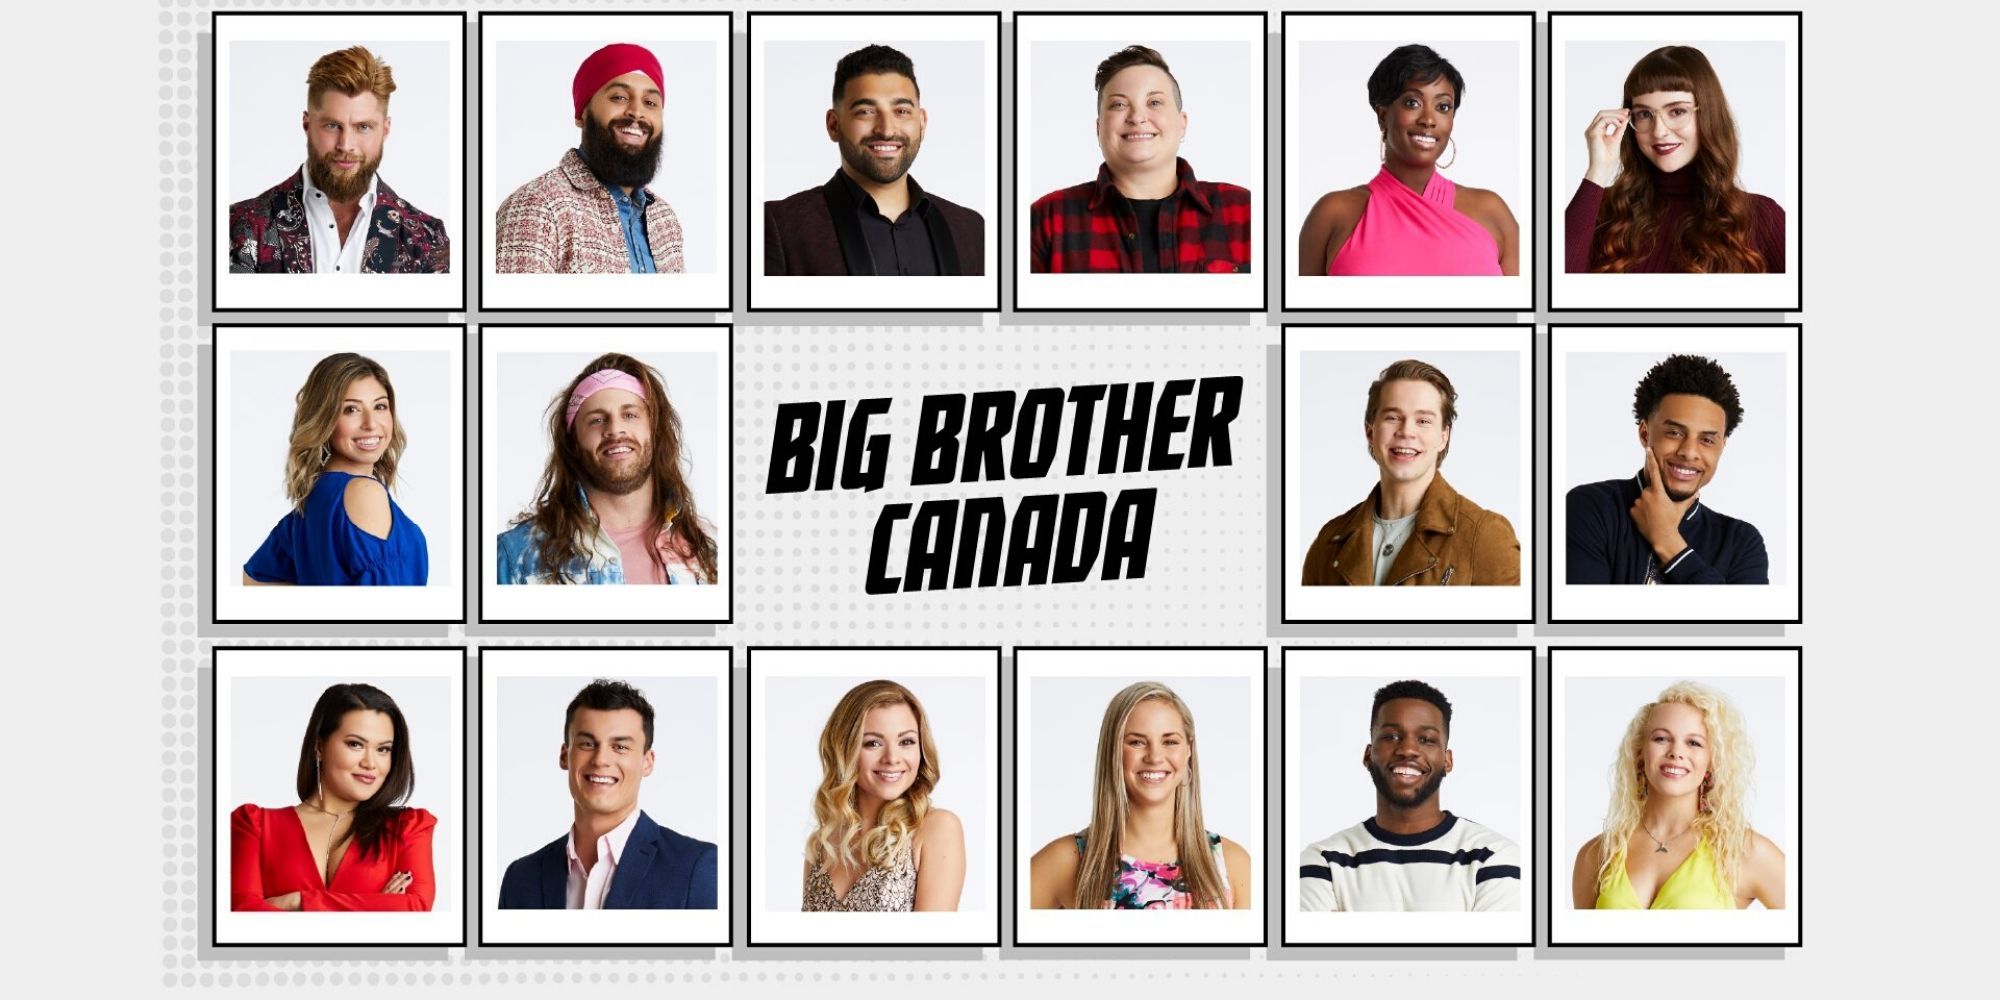 Big Brother Canada Canceled Due to Coronavirus State of Emergency